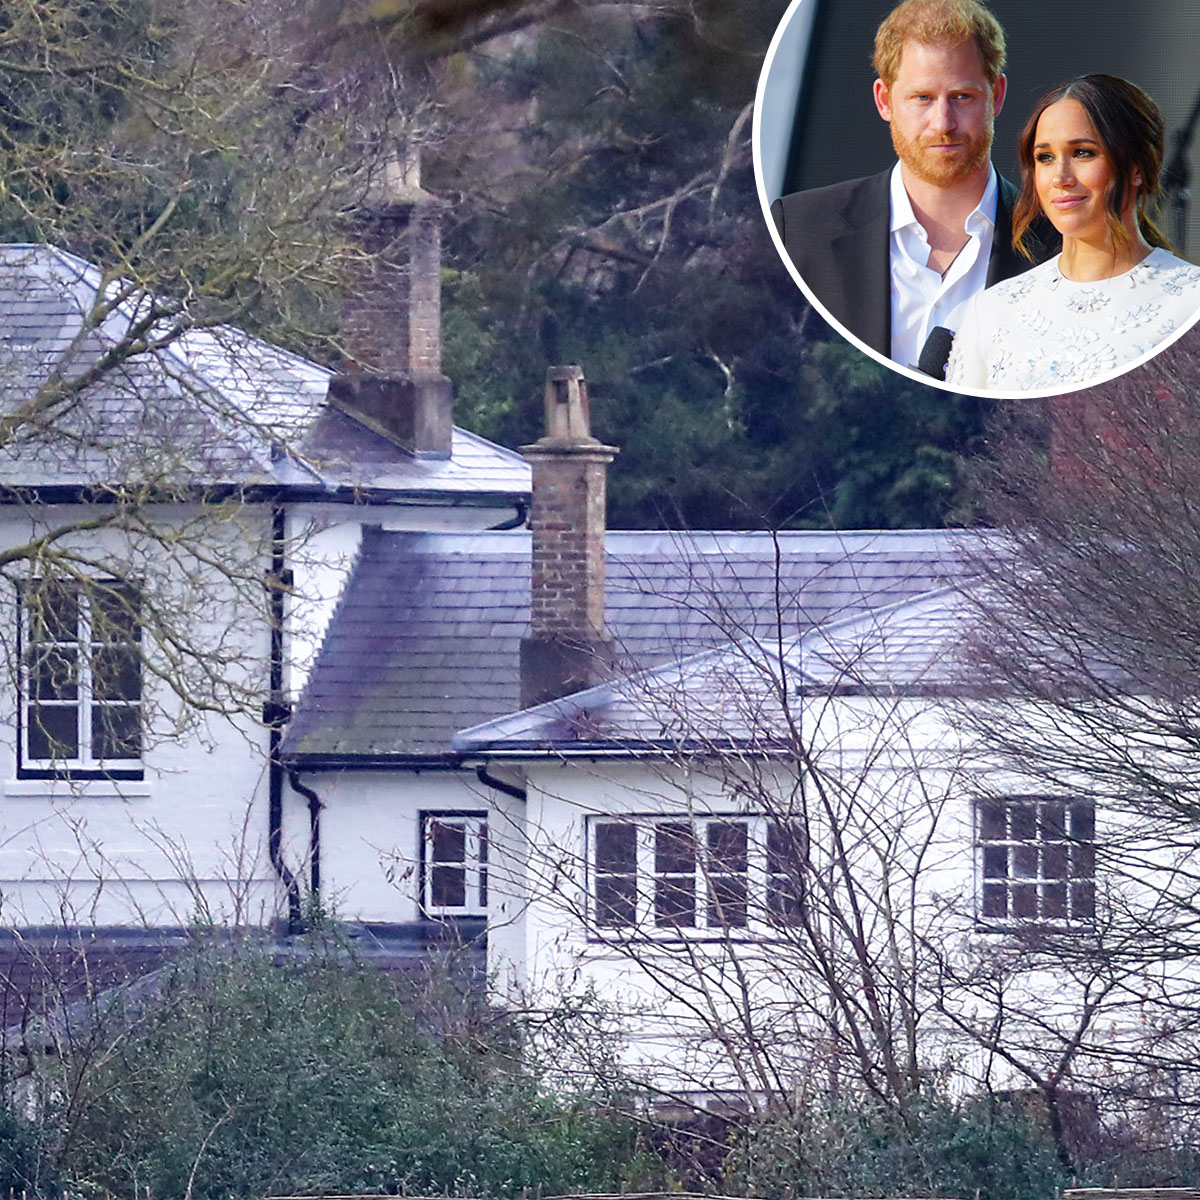 Prince Harry Is Back in California After UK Stay at Frogmore Cottage